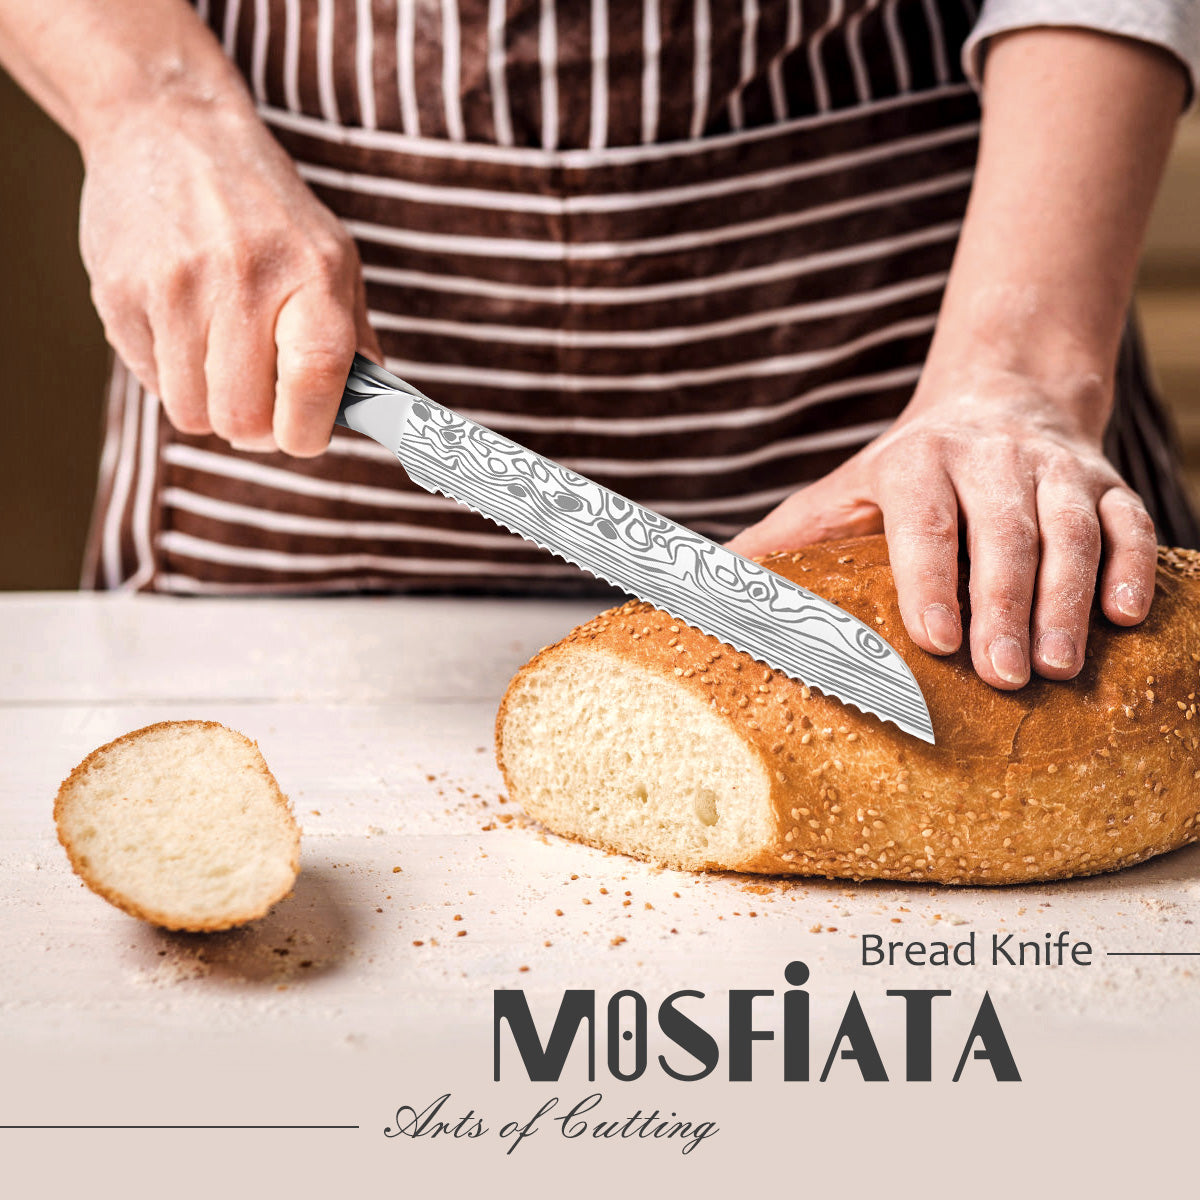 Bread Lame - Premium Hand Crafted Bread Knives, Best Dough Scoring Tool for Professional and Serious Bakers, with 5 Blades Included and Authentic